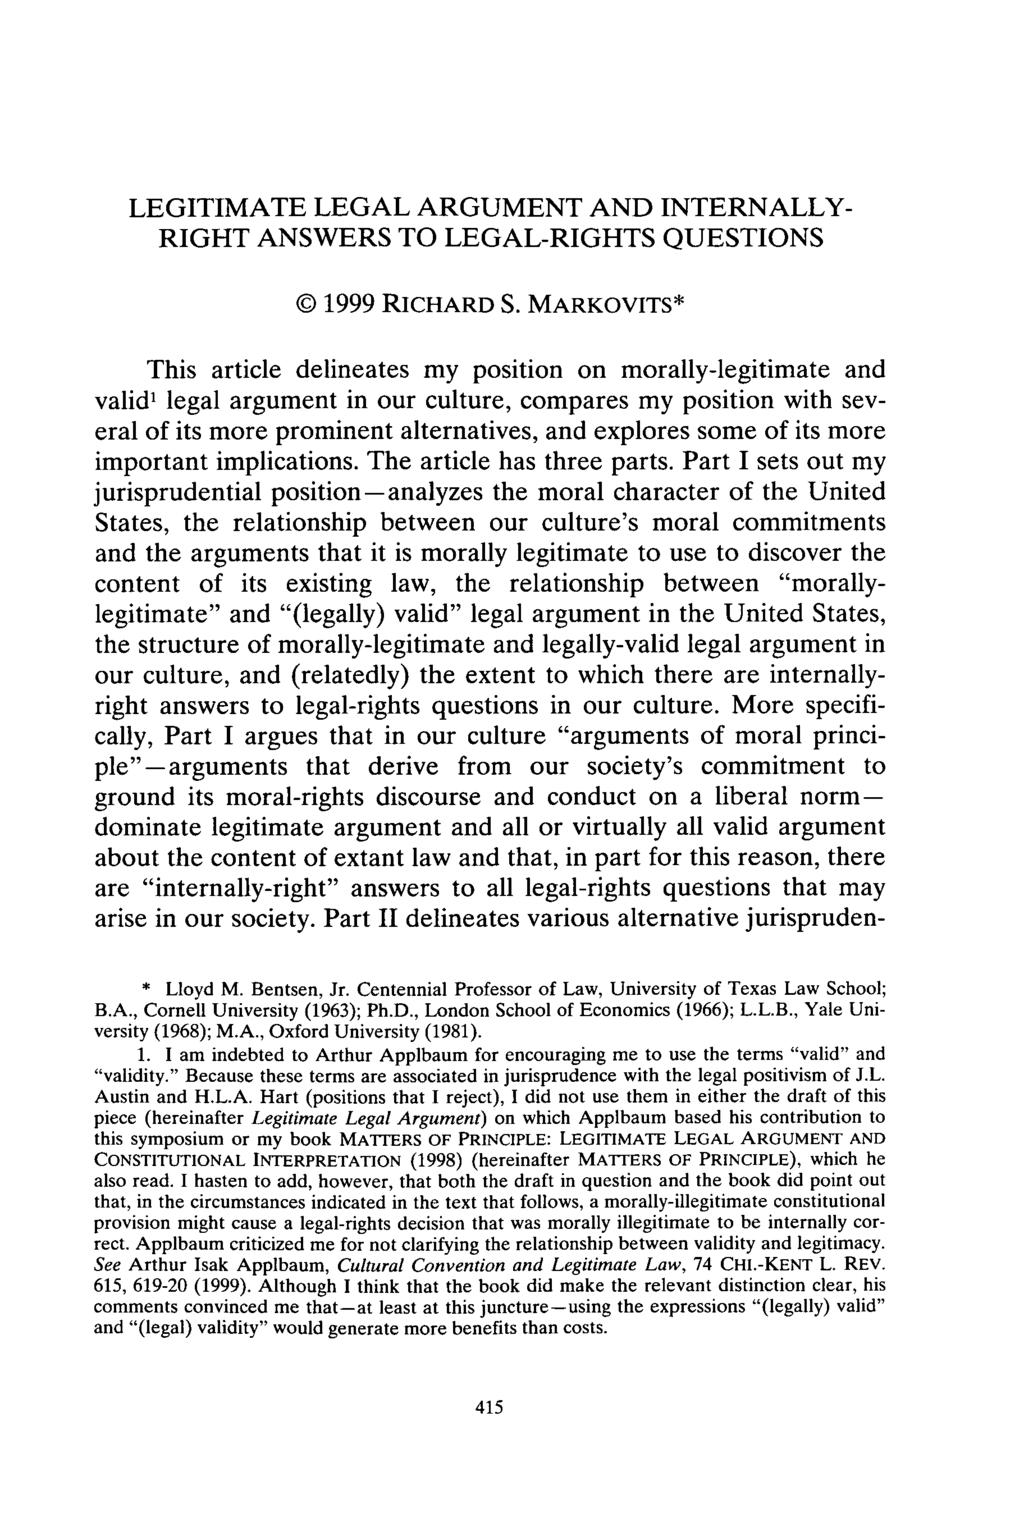 LEGITIMATE LEGAL ARGUMENT AND INTERNALLY- RIGHT ANSWERS TO LEGAL-RIGHTS QUESTIONS 1999 RICHARD S.